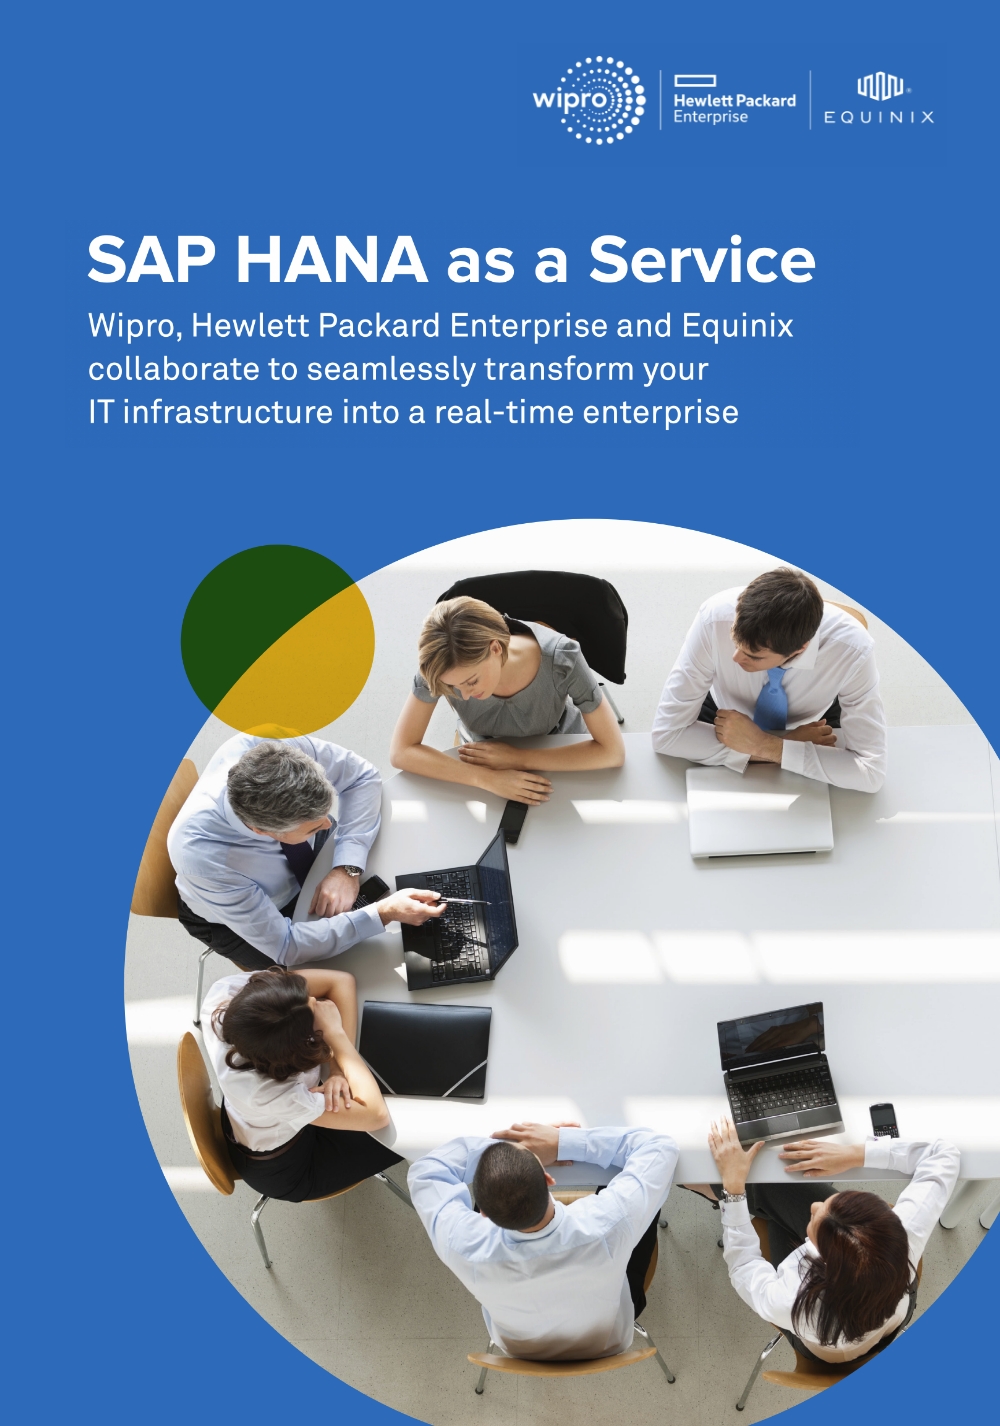 SAP HANA as-a-Service with Wipro, Hewlett Packard Enterprise, and Equinix